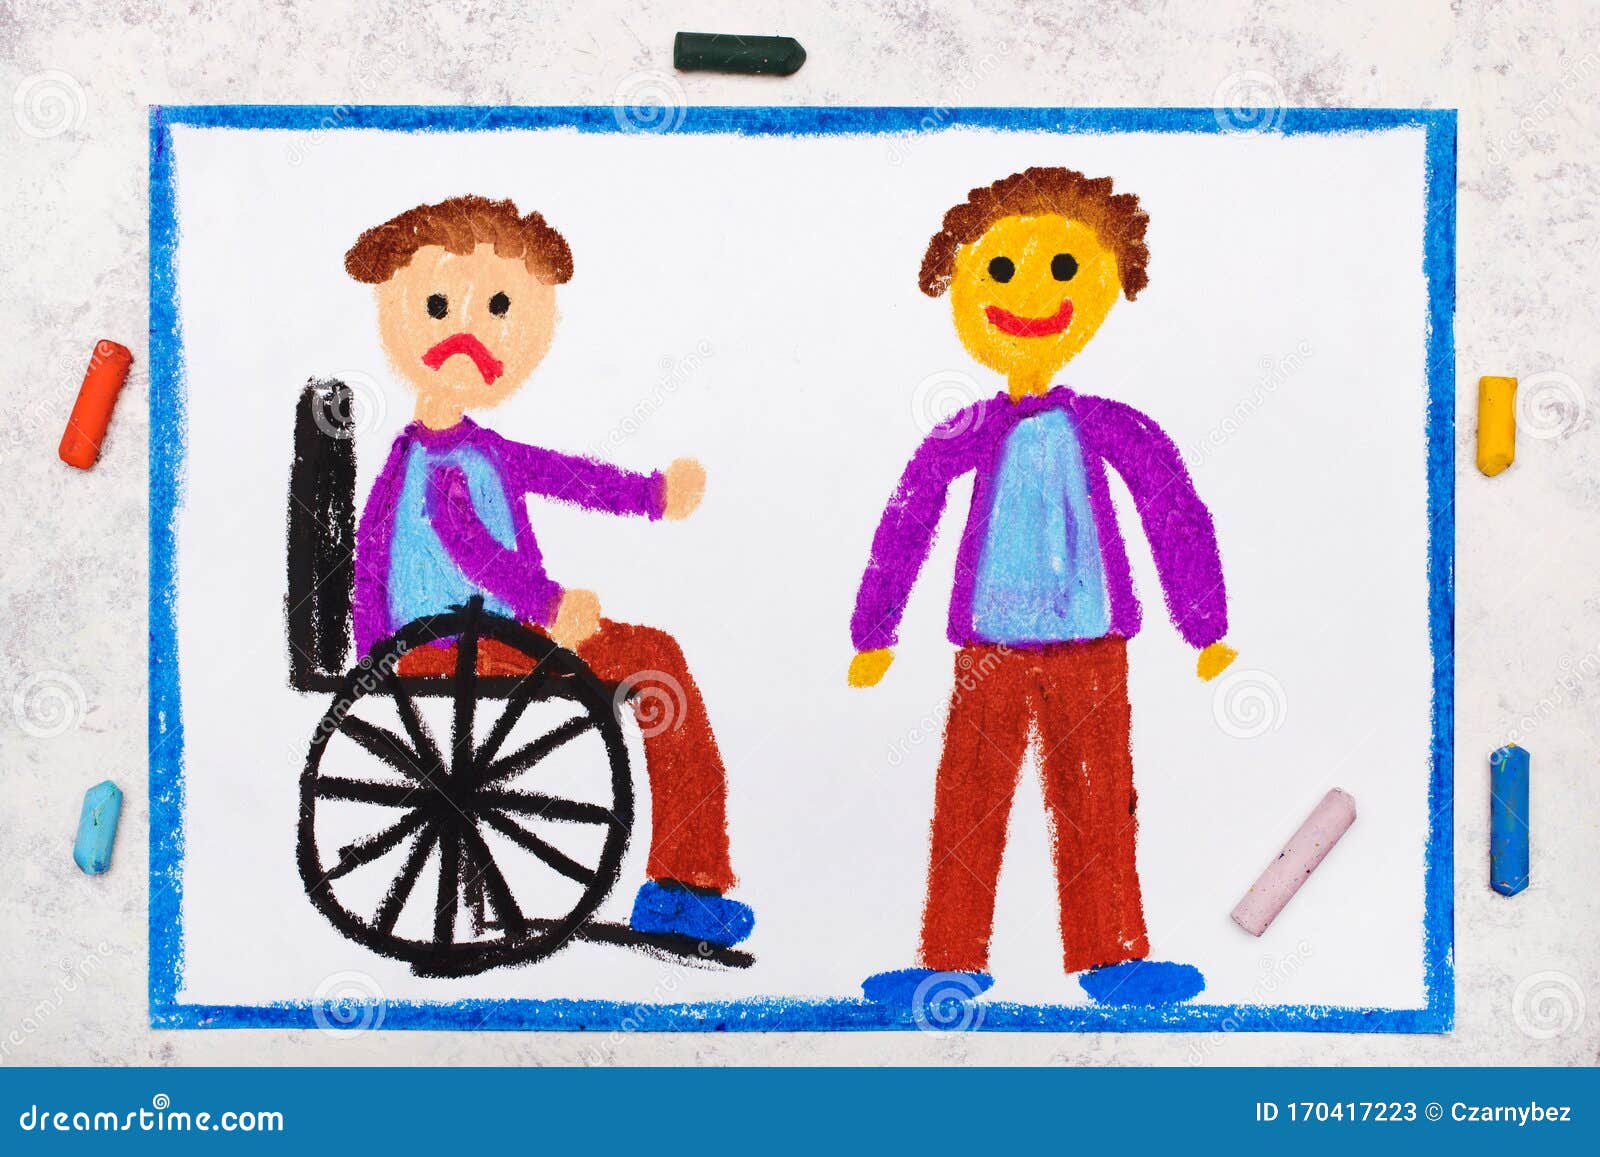 Photo of colorful drawing: Sad boy sitting on his wheelchair. Disabled boy and his healthy friend